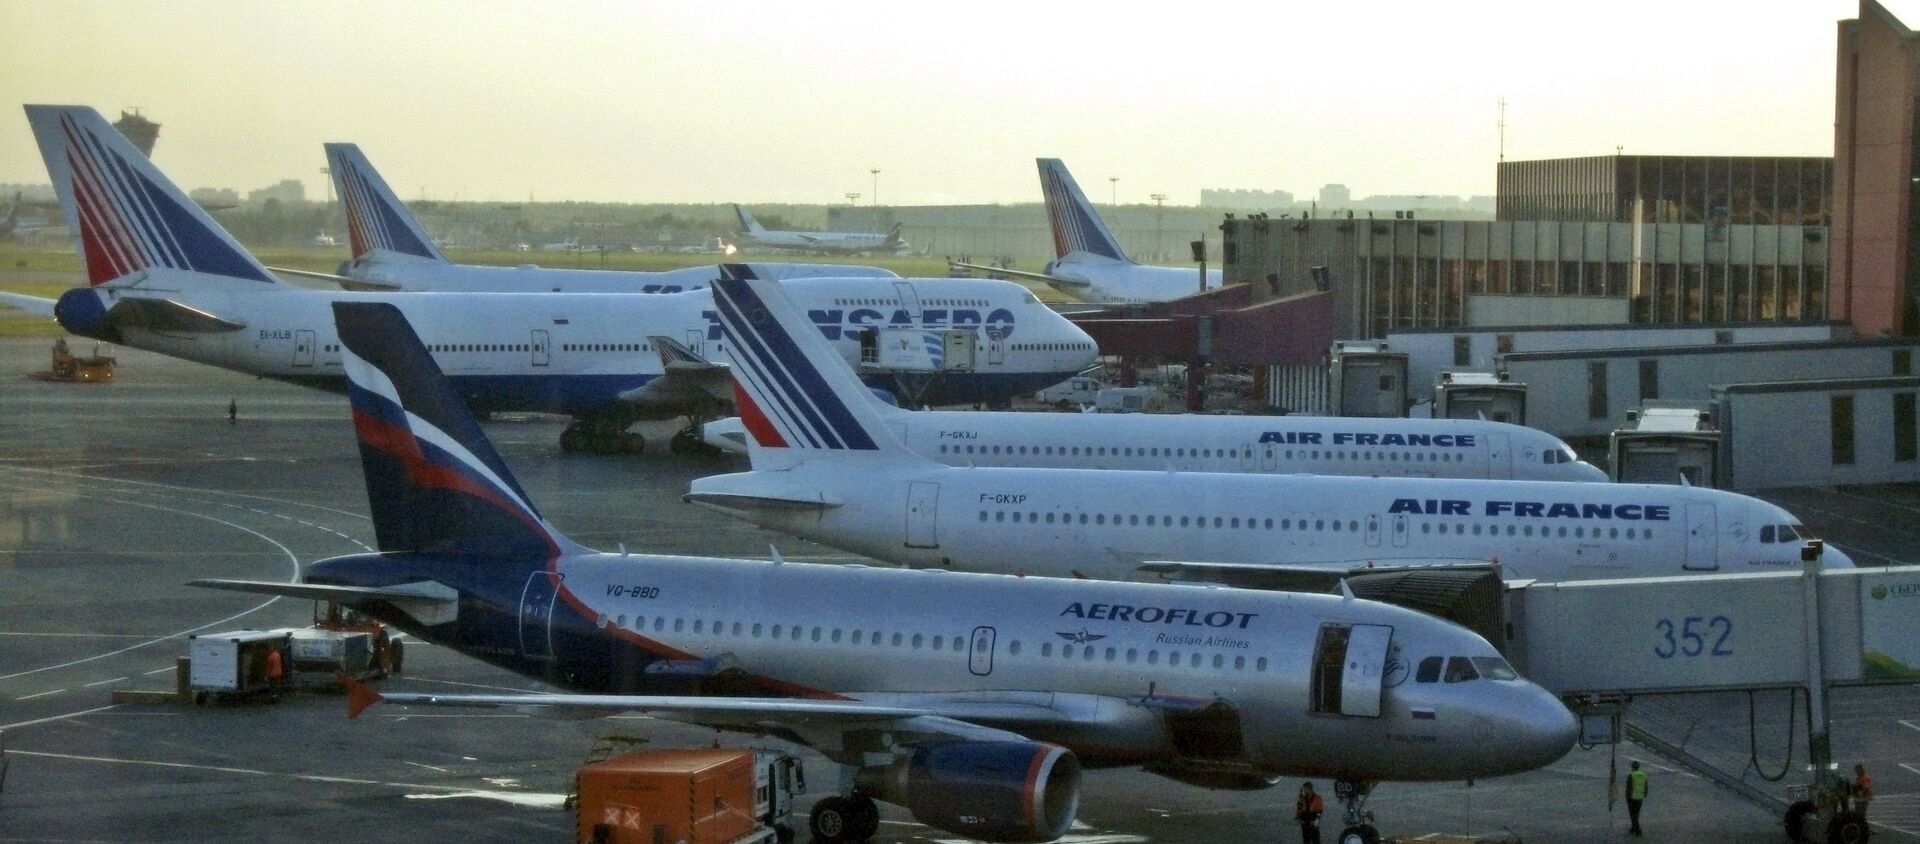 Passengers planes are parked on the tarmac of Moscow's Sheremetyevo airport, Russia - Sputnik International, 1920, 03.03.2016